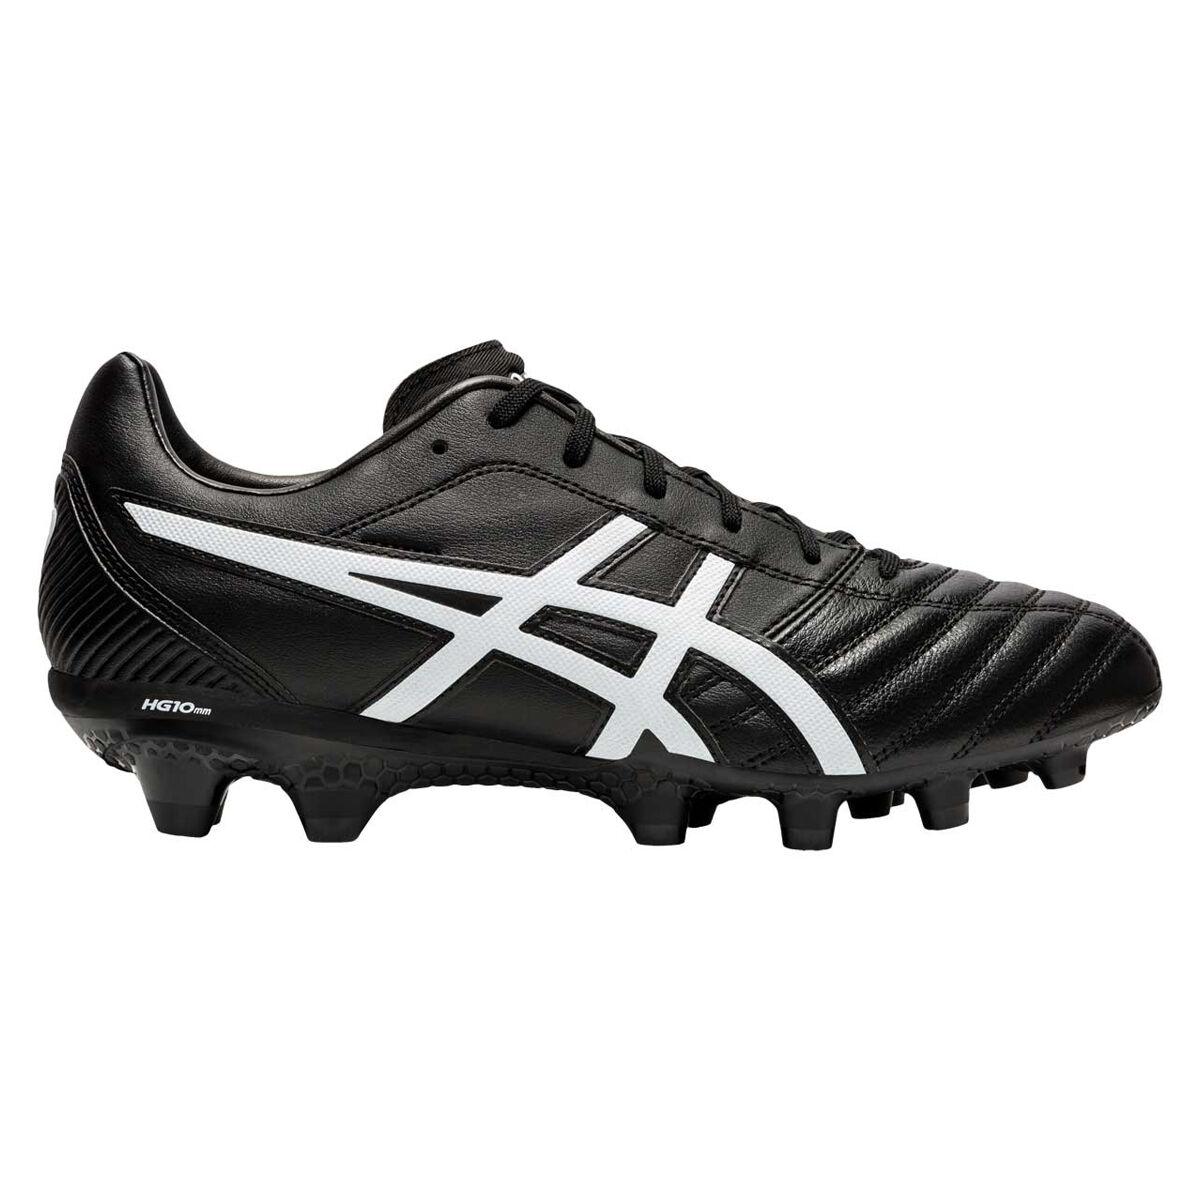 asic boots